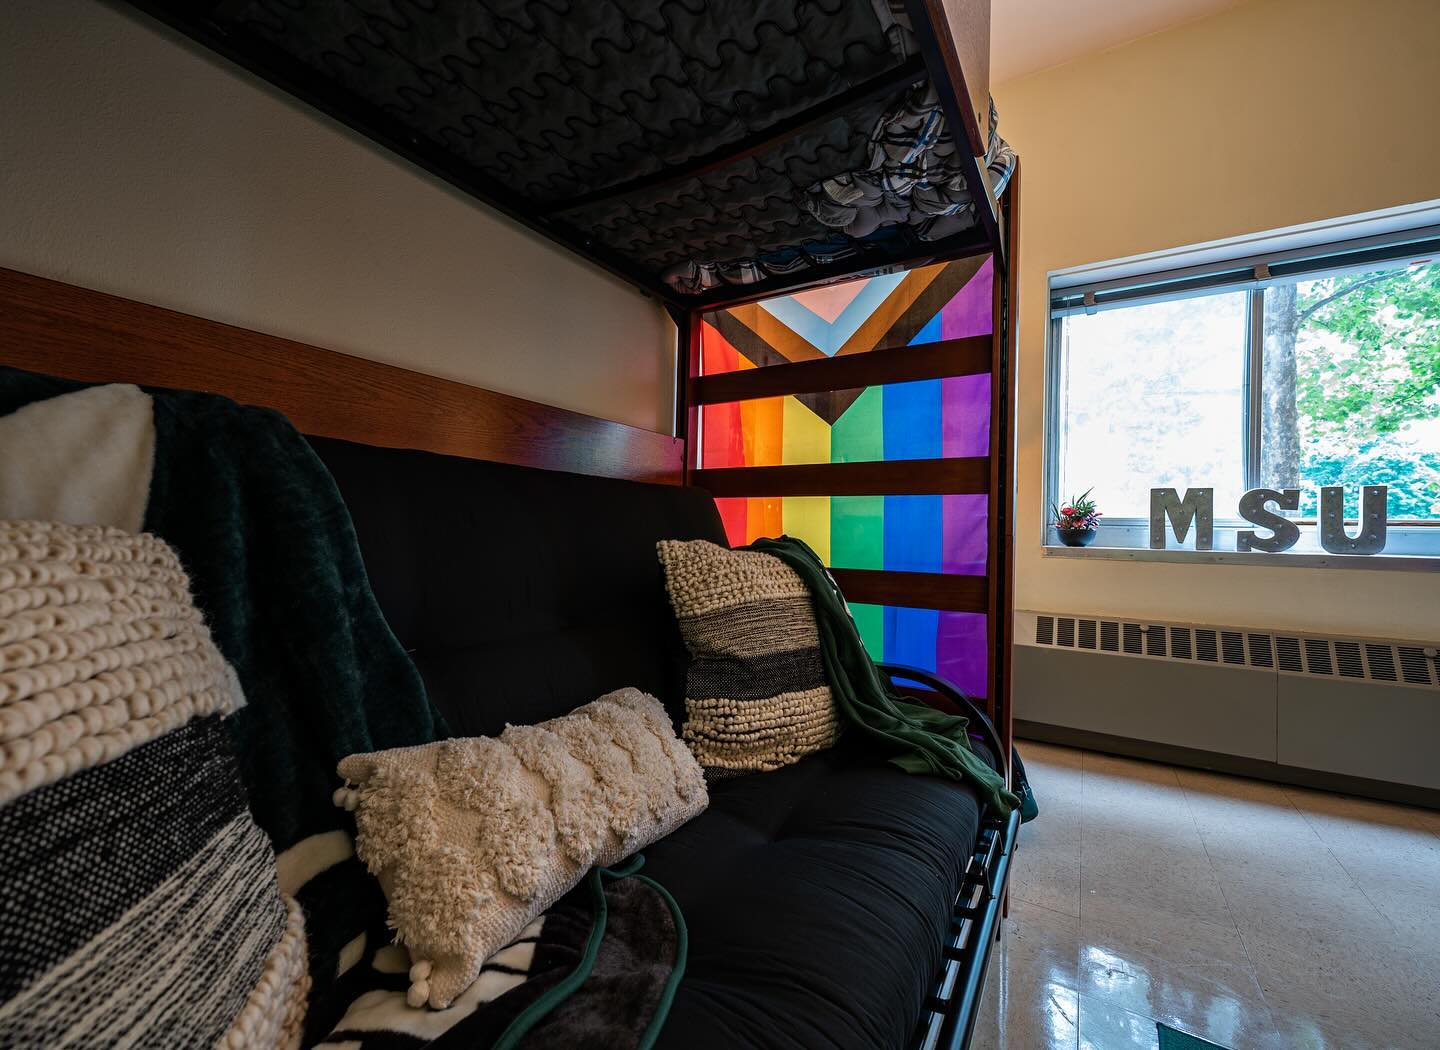 A progress pride flag hangs in a residence hall room.